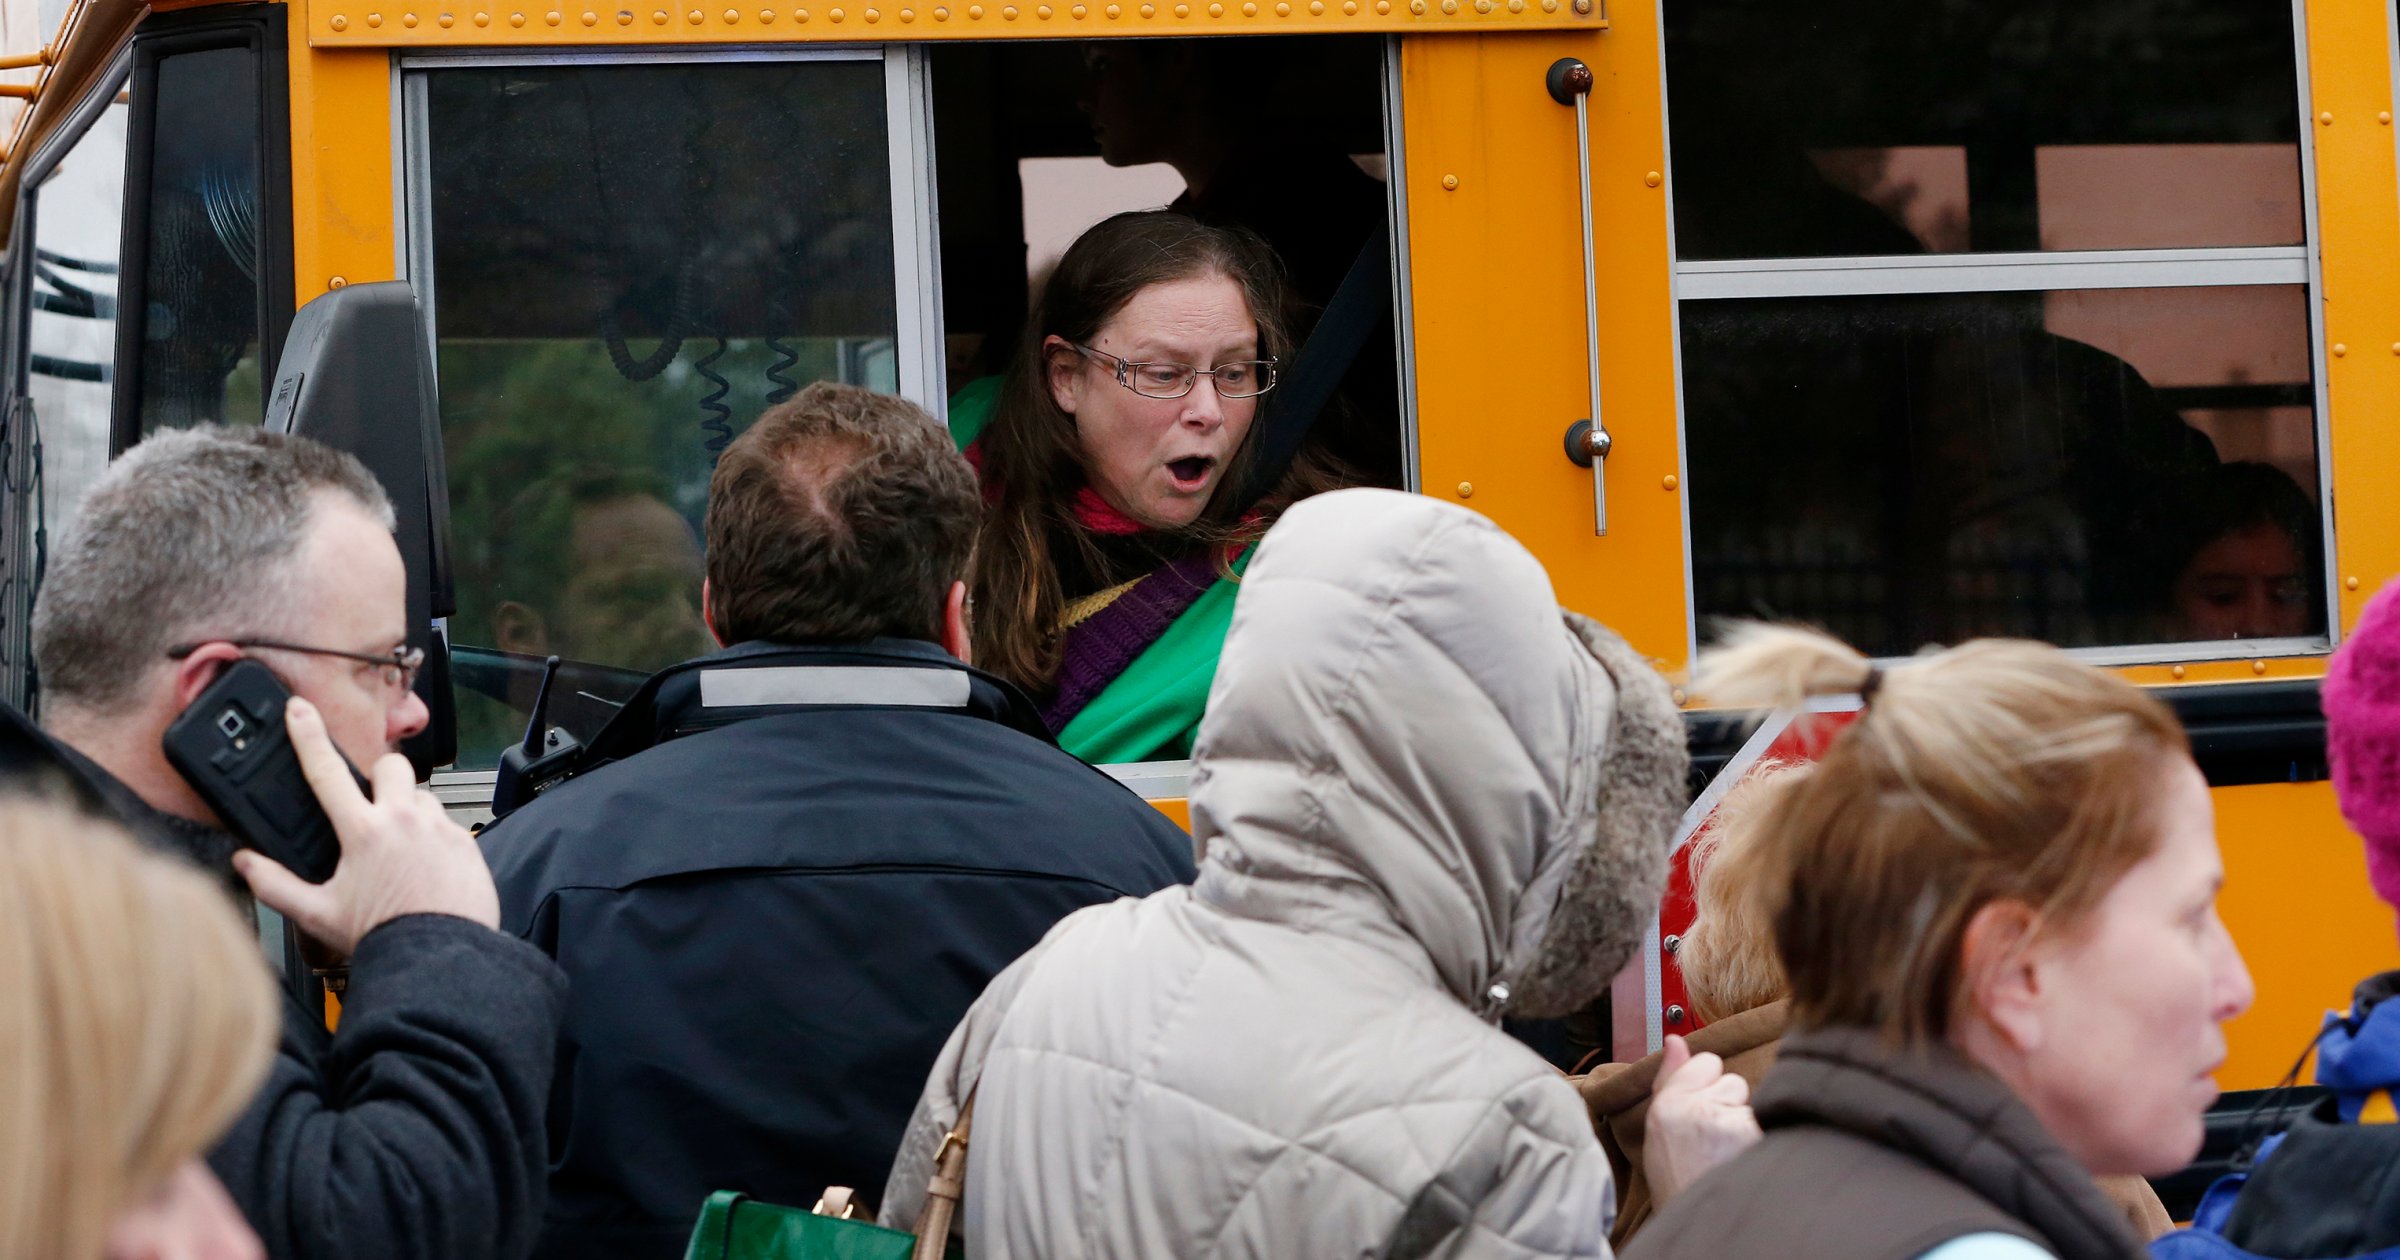 A school bus driver yells to a parent that their child is safe after a bus accident at Amy Beverland Elementary School that left several students injured and one adult dead on school grounds on Jan. 26, 2016 in Indianapolis, Ind.